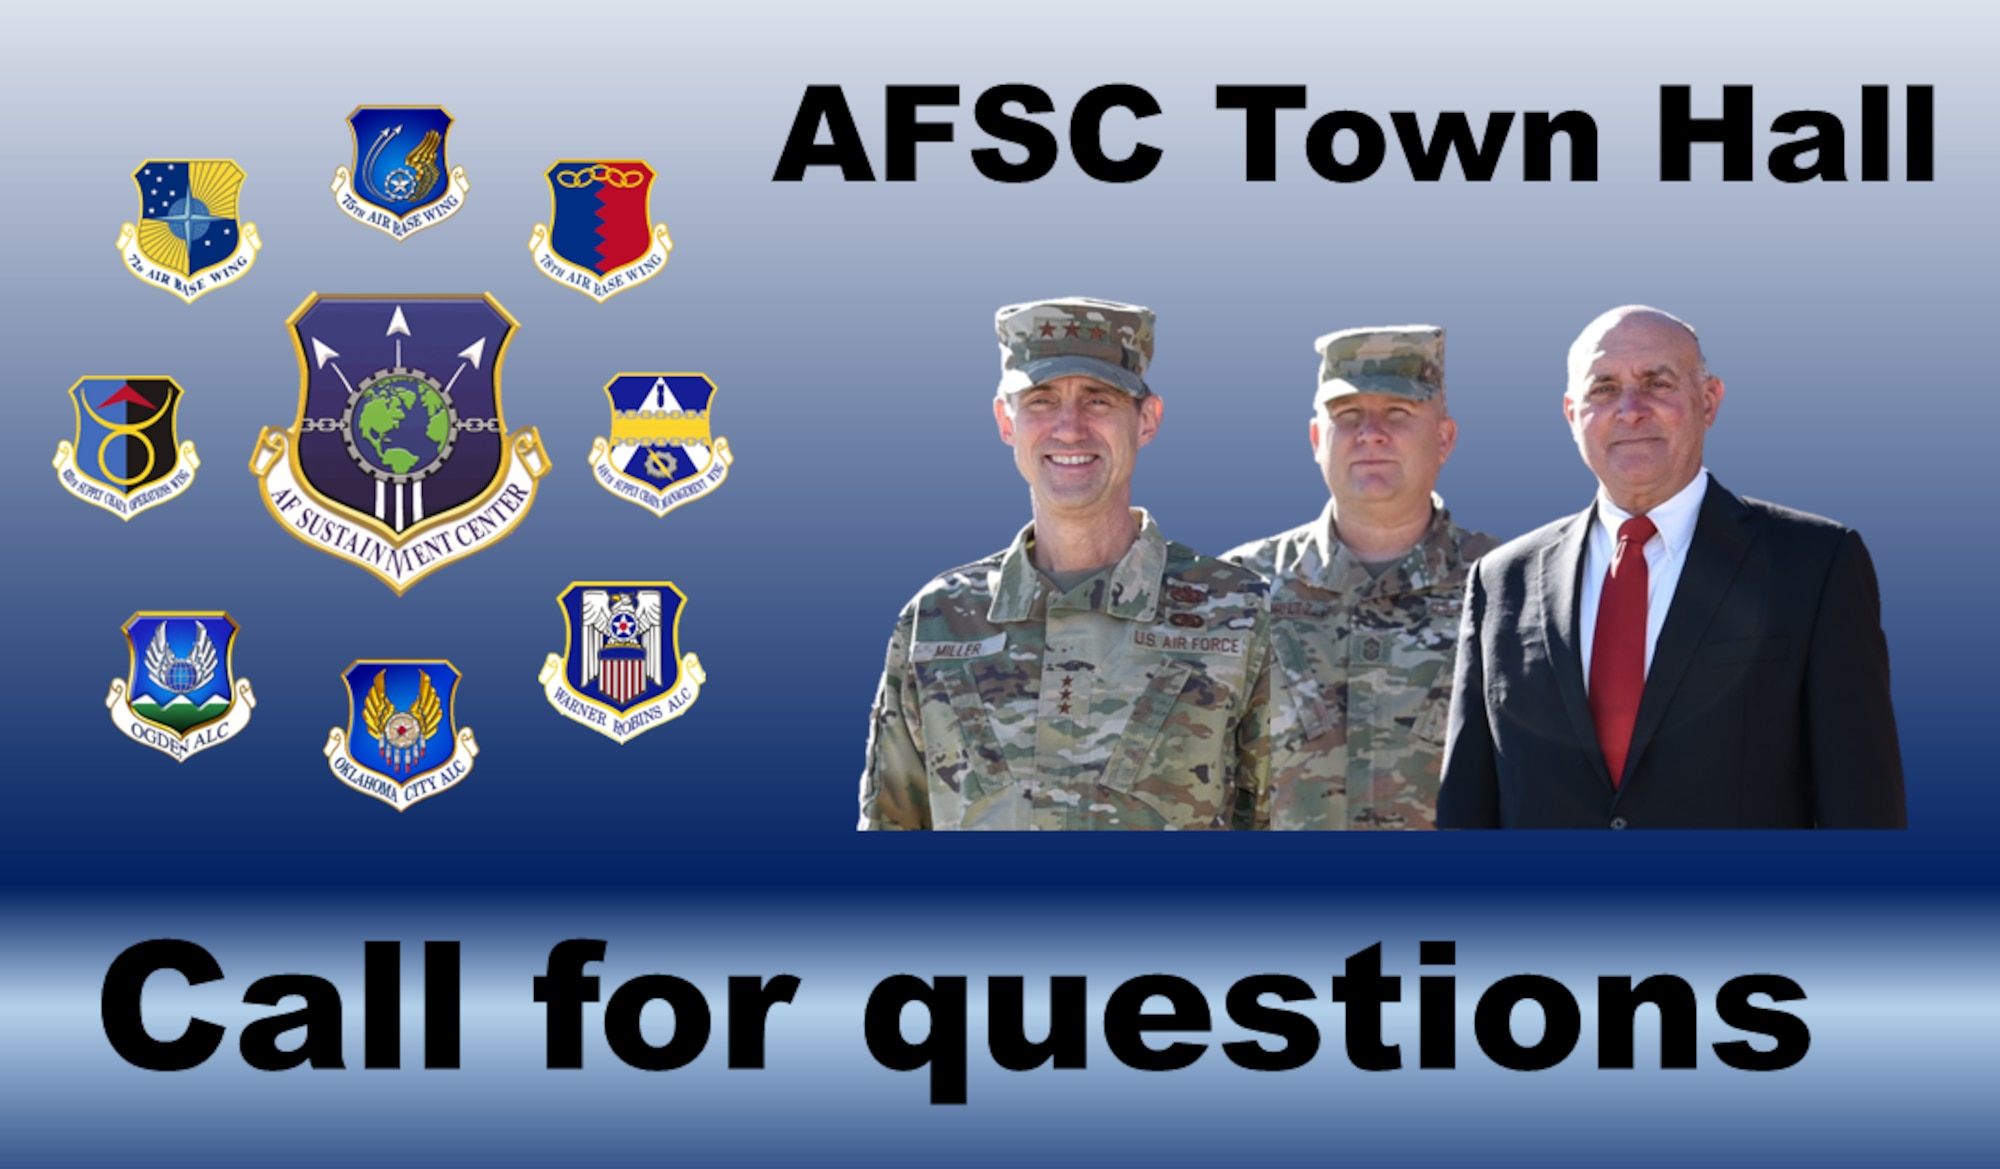 AFSC Command Team call for questions for a taped town hall event to address AFSC-related concerns directly.